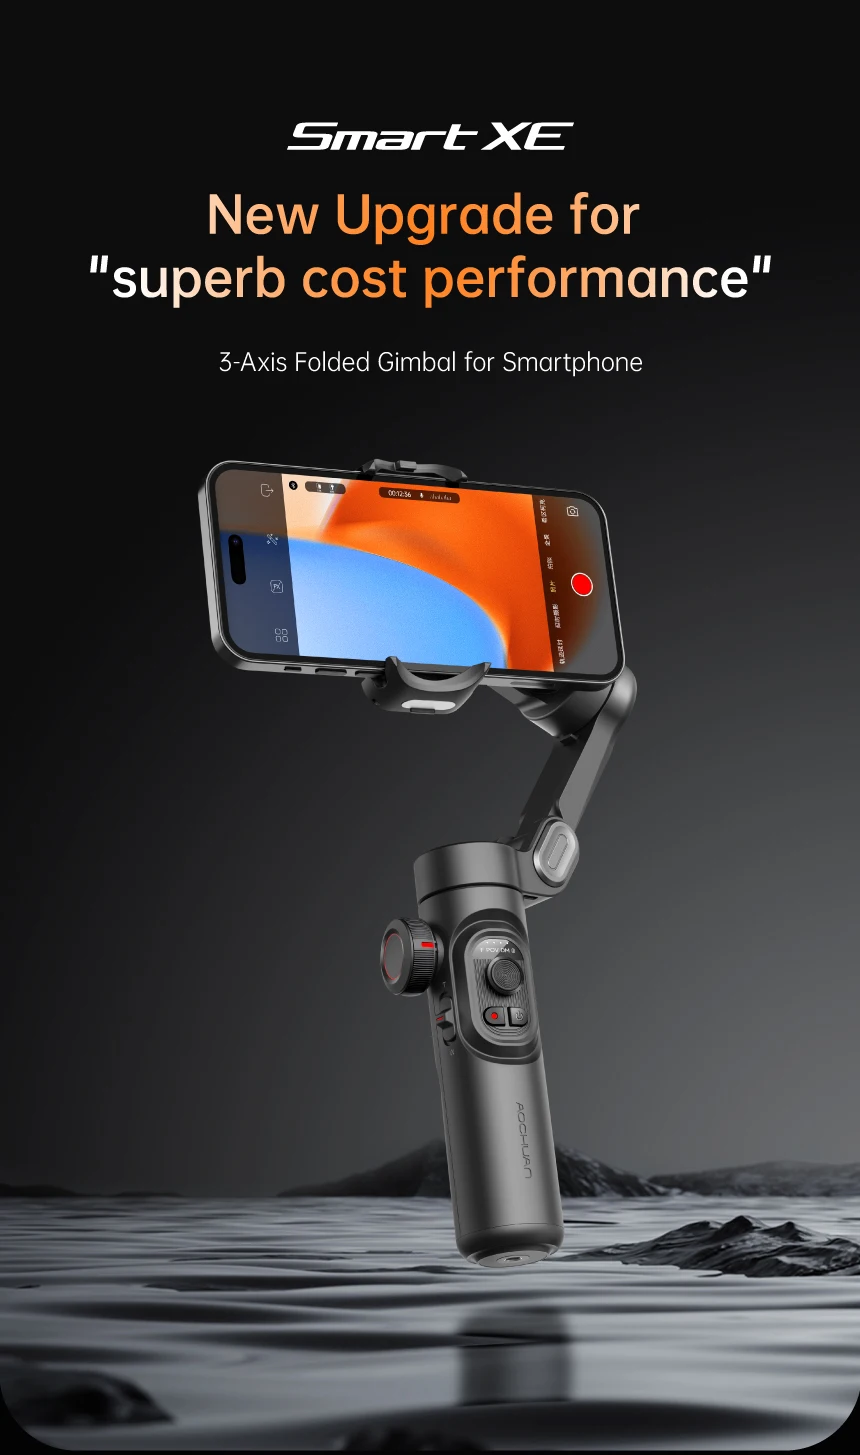 AOCHUAN 3-Axis Handheld Gimbal Stabilizer for Smartphone with Fill Light for iPhone Android Face Tracking Tiktok Vlog Smart XE